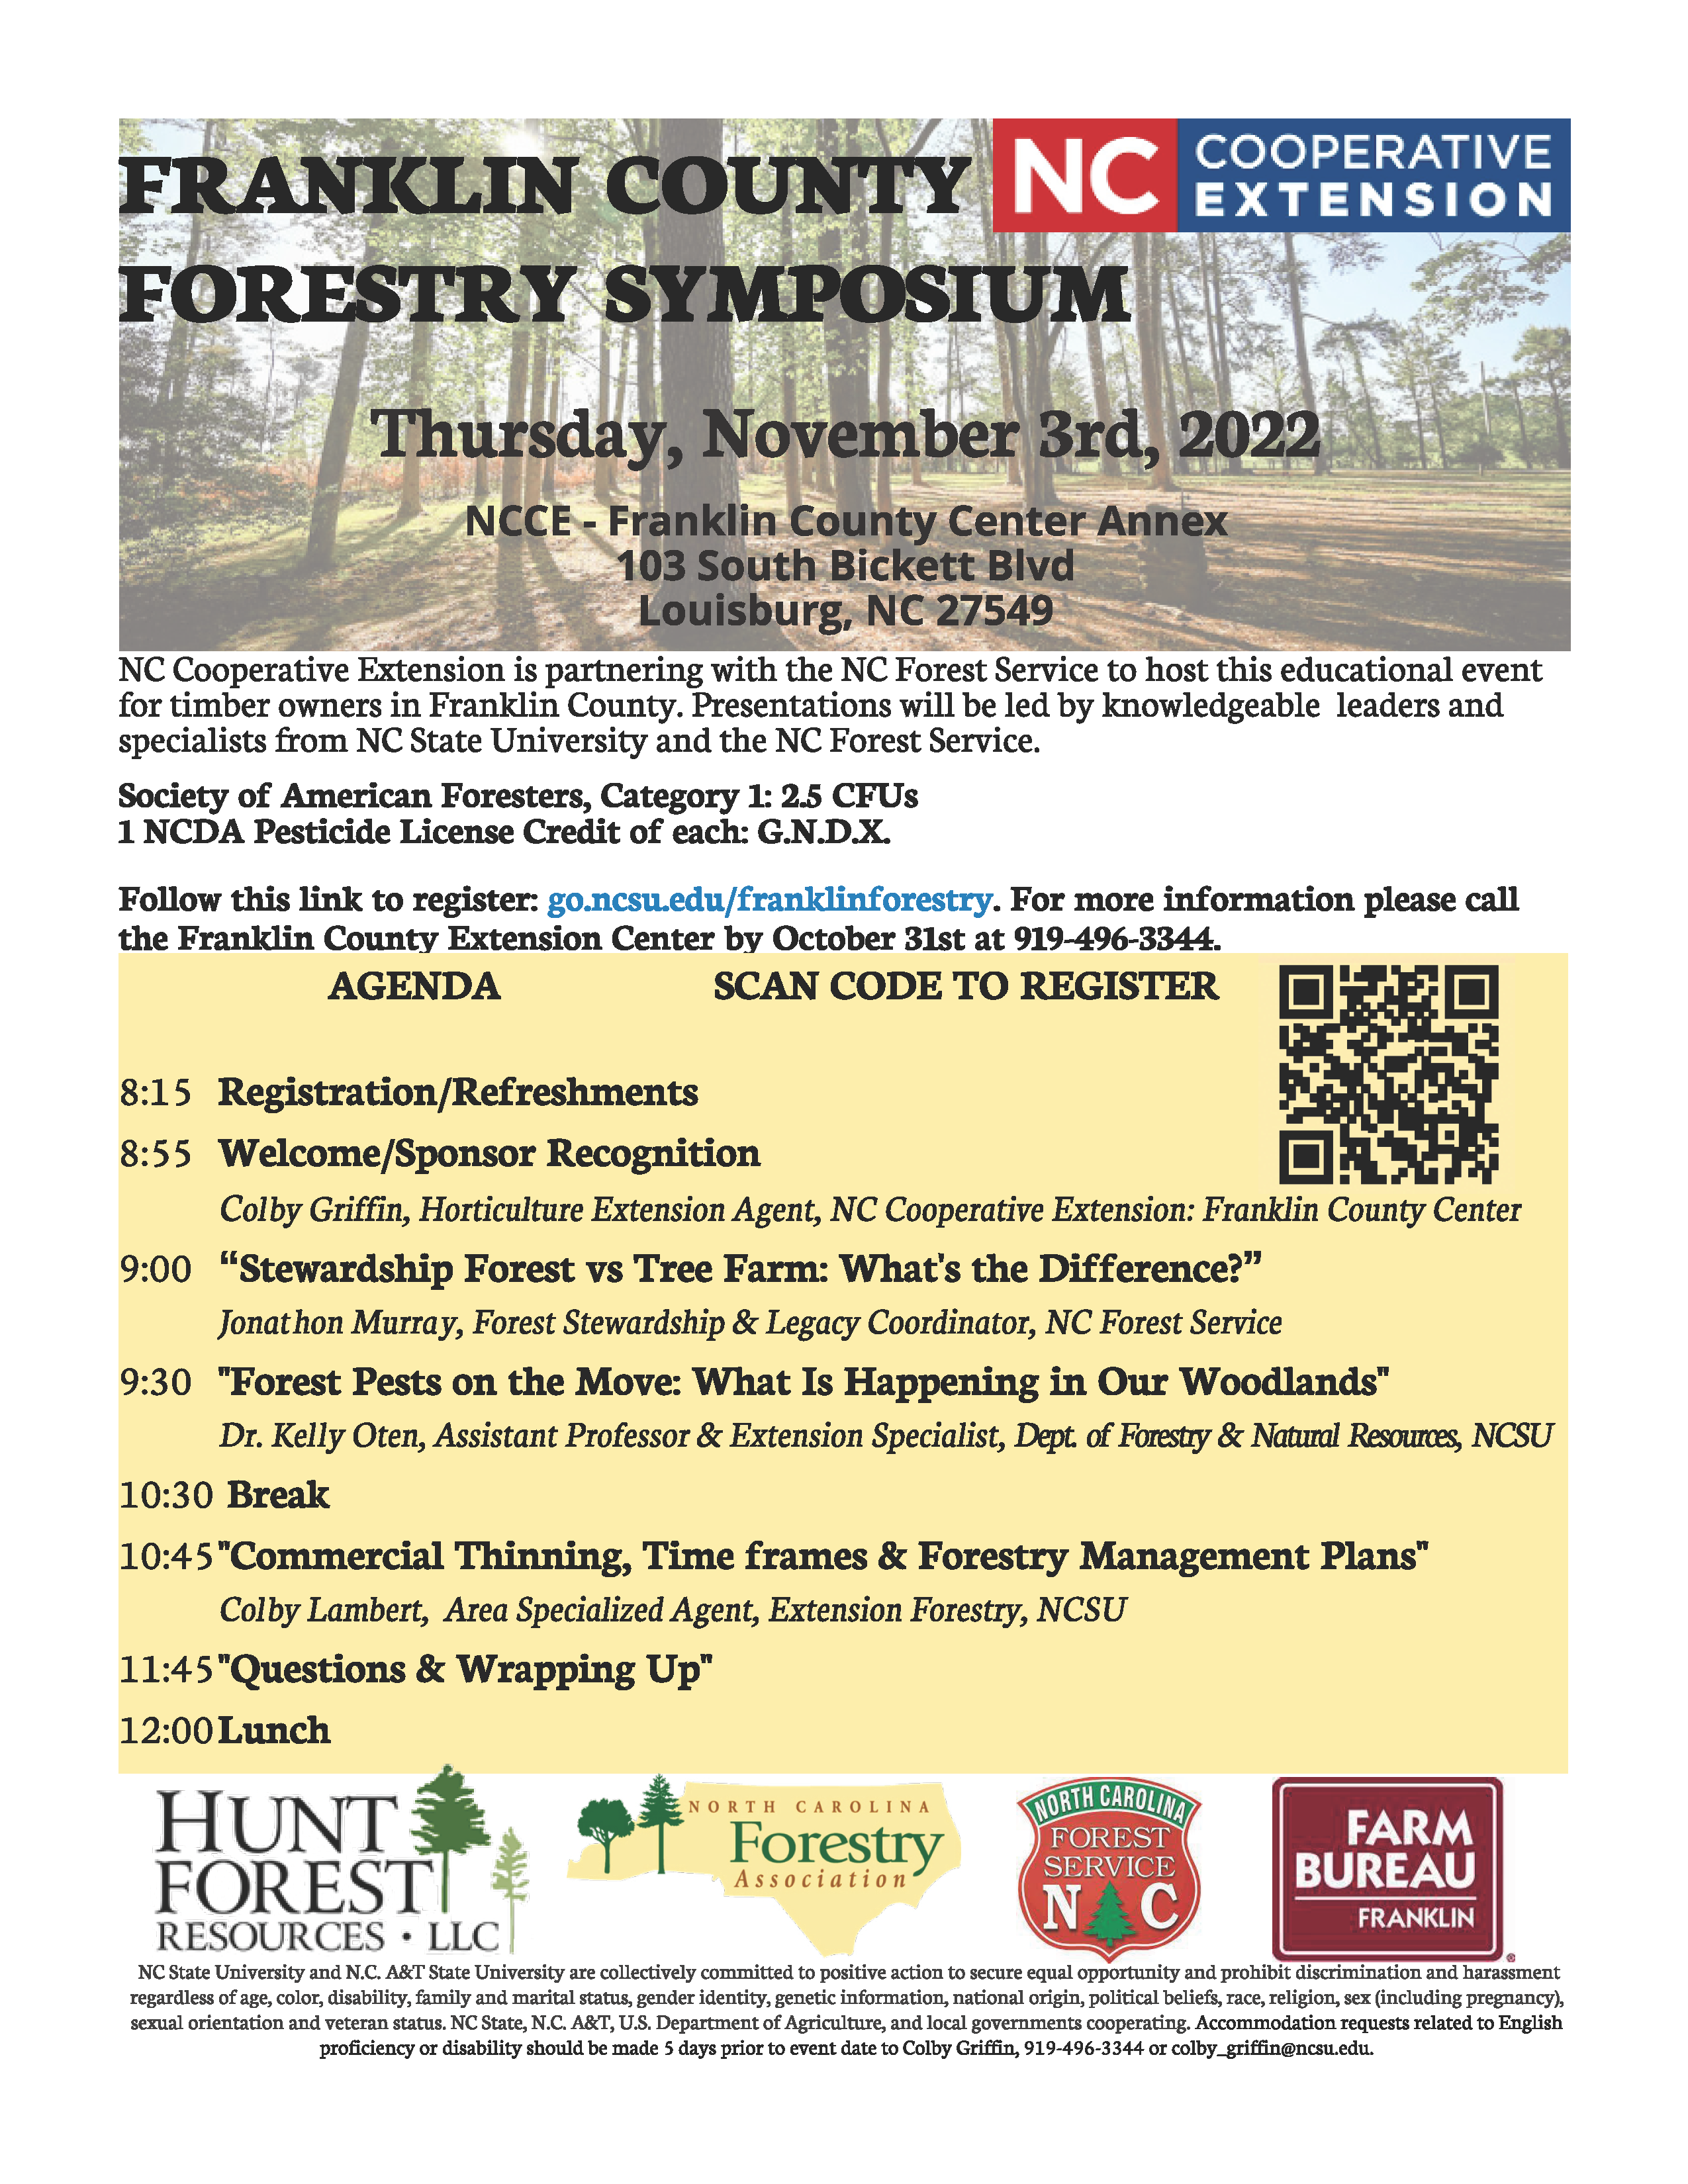 Forestry Symposium Flyer with agenda and meeting details